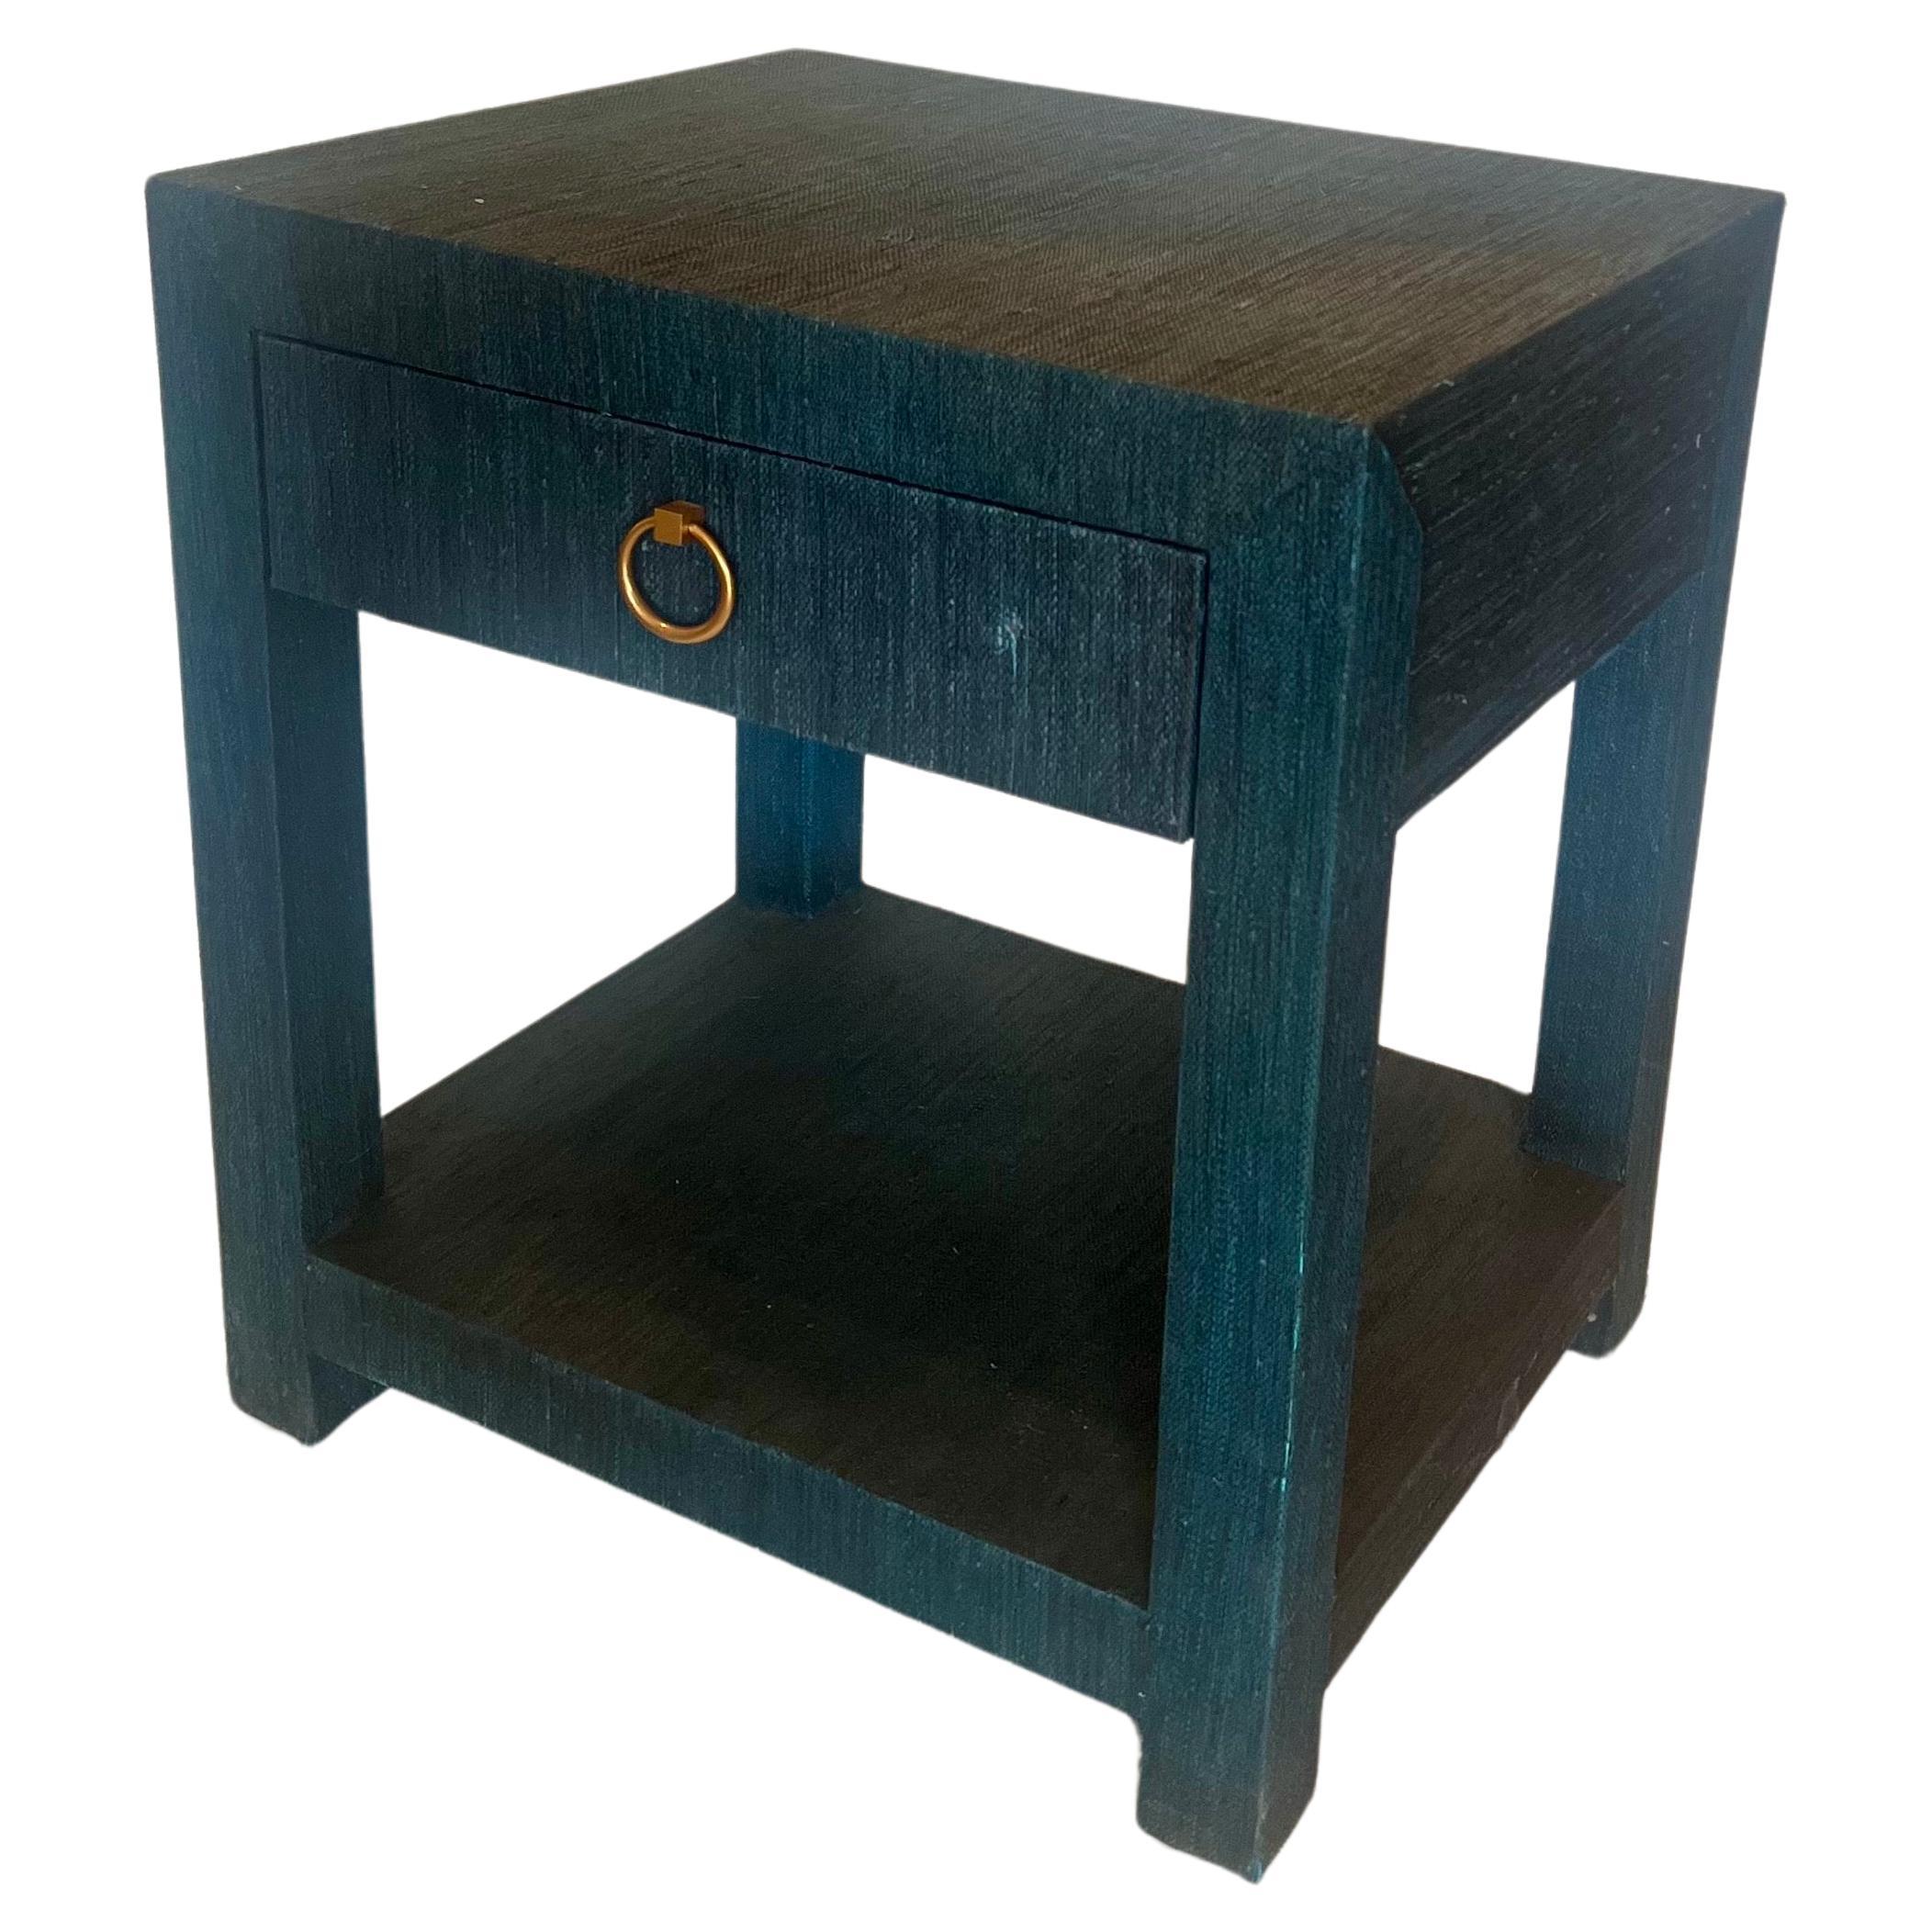 Contemporary Elegant Nightstand End Table in Linen by Serena & Lily